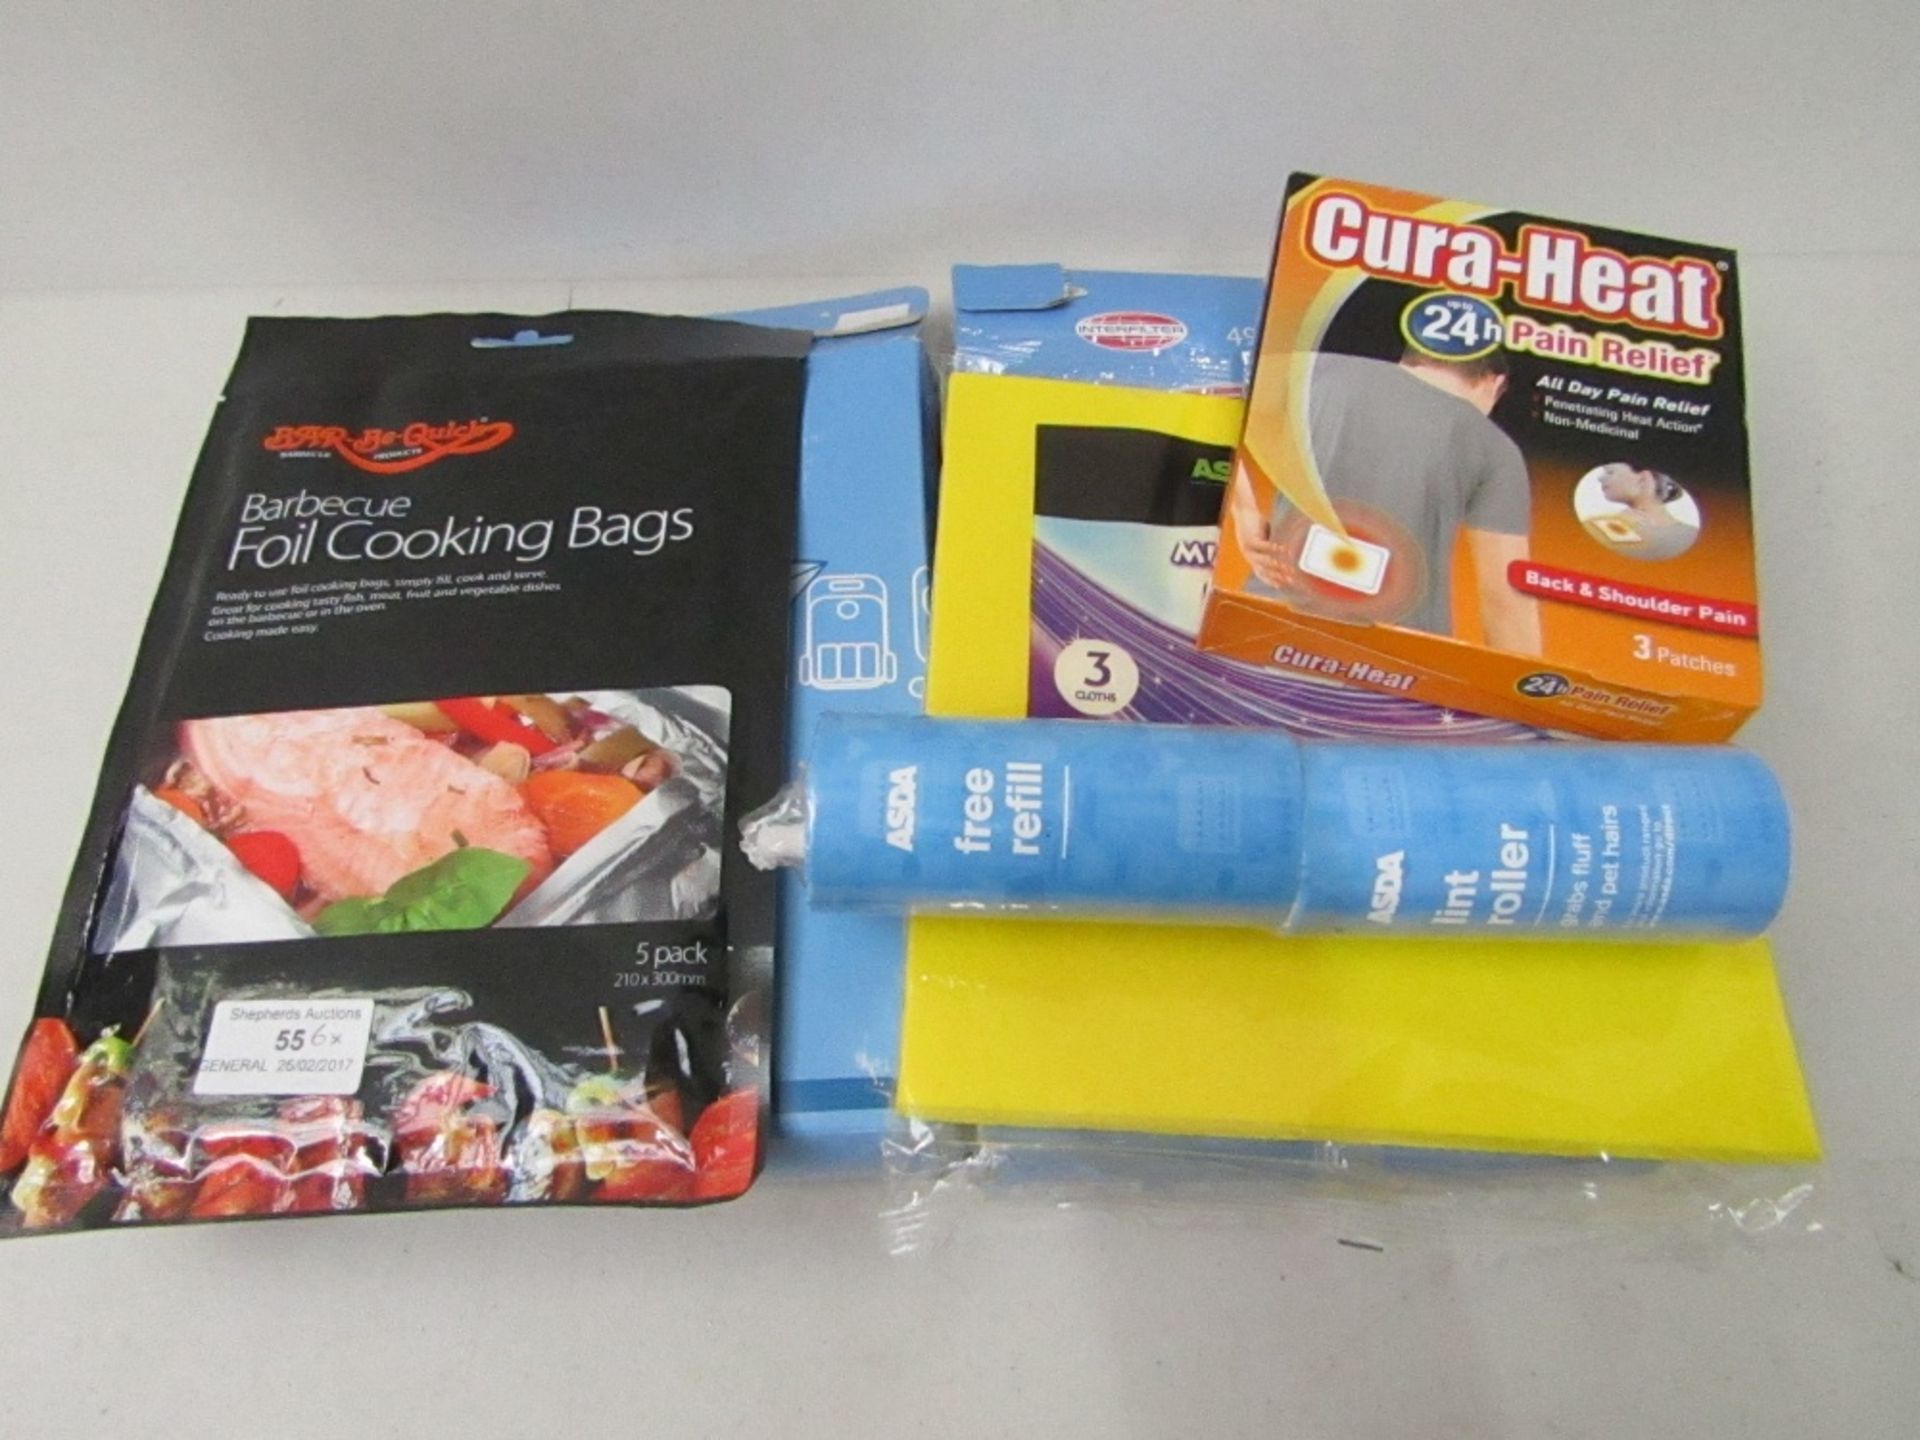 6 items being, barbecue foil cooking bags, ASDA lint roller, Cura-heat pain relief, ASDA multi